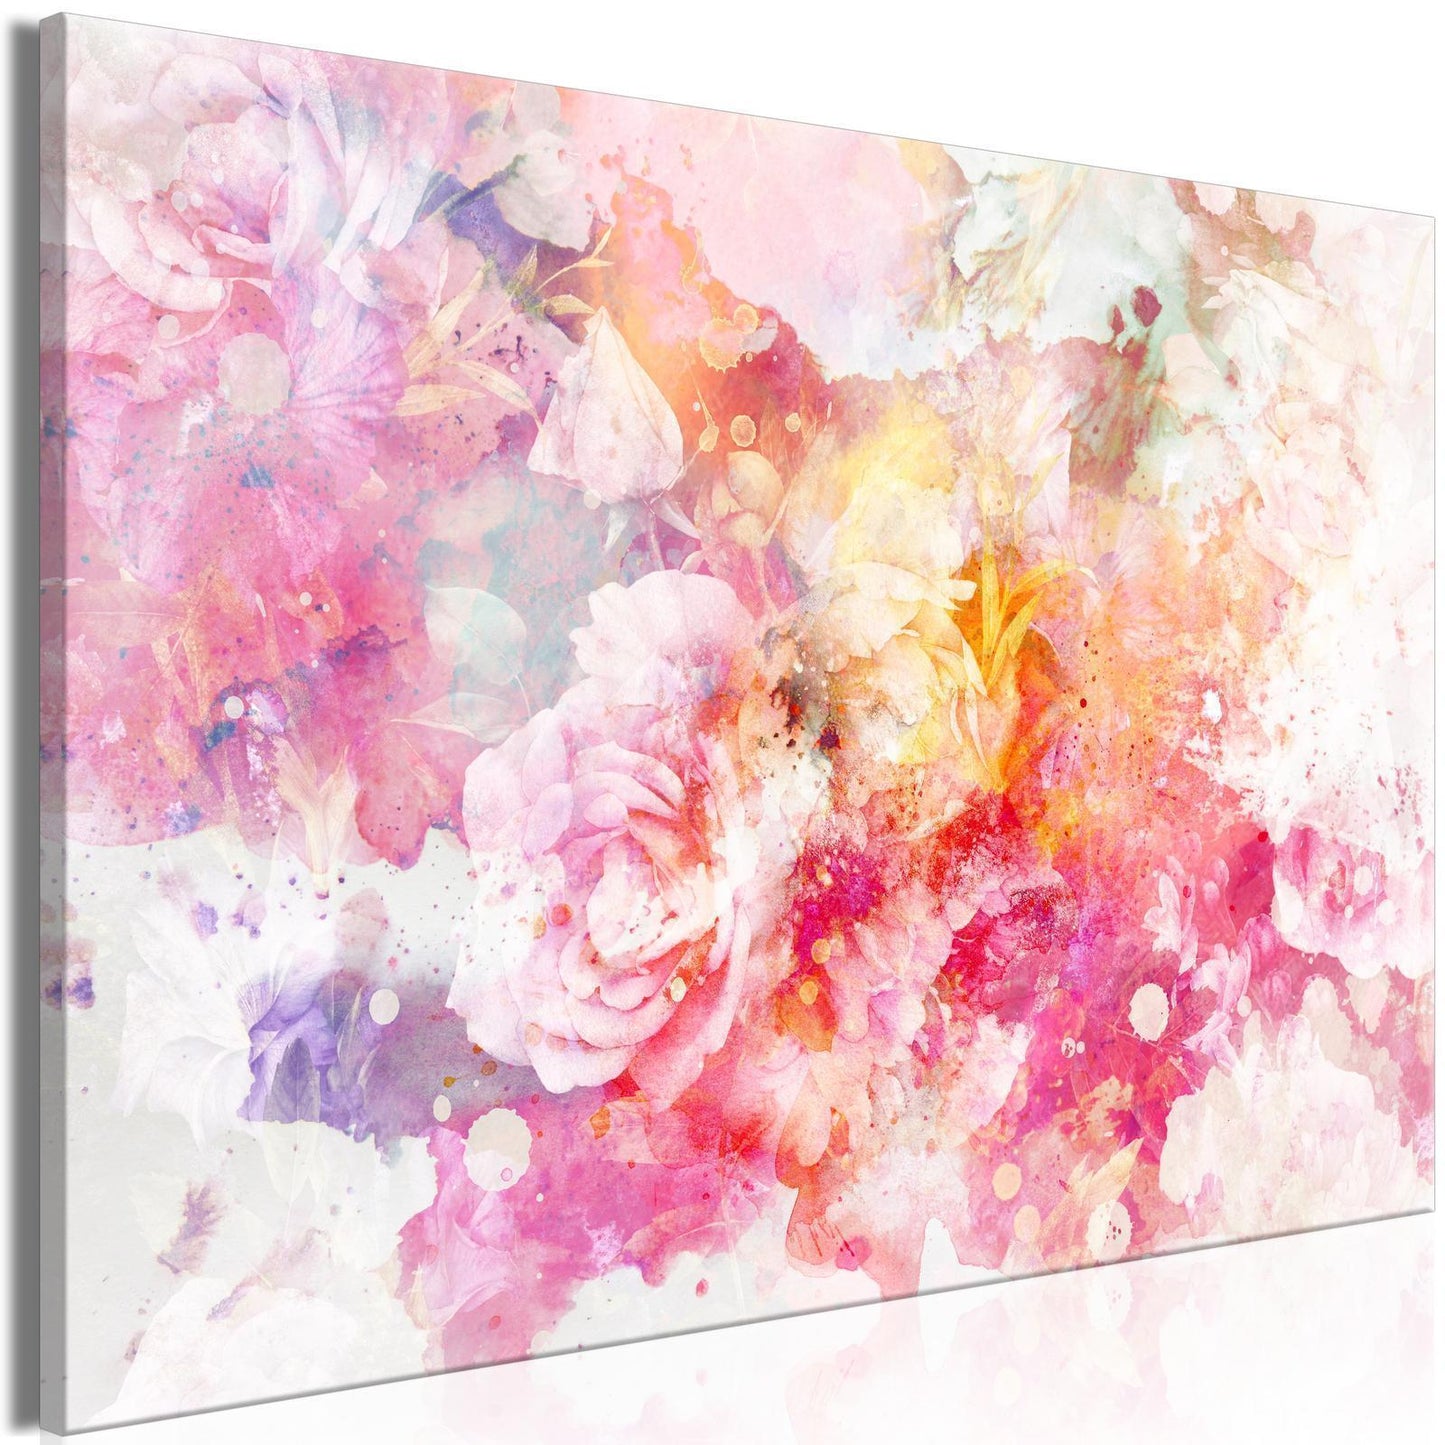 Painting - Explosion of Flowers (1 Part) Wide